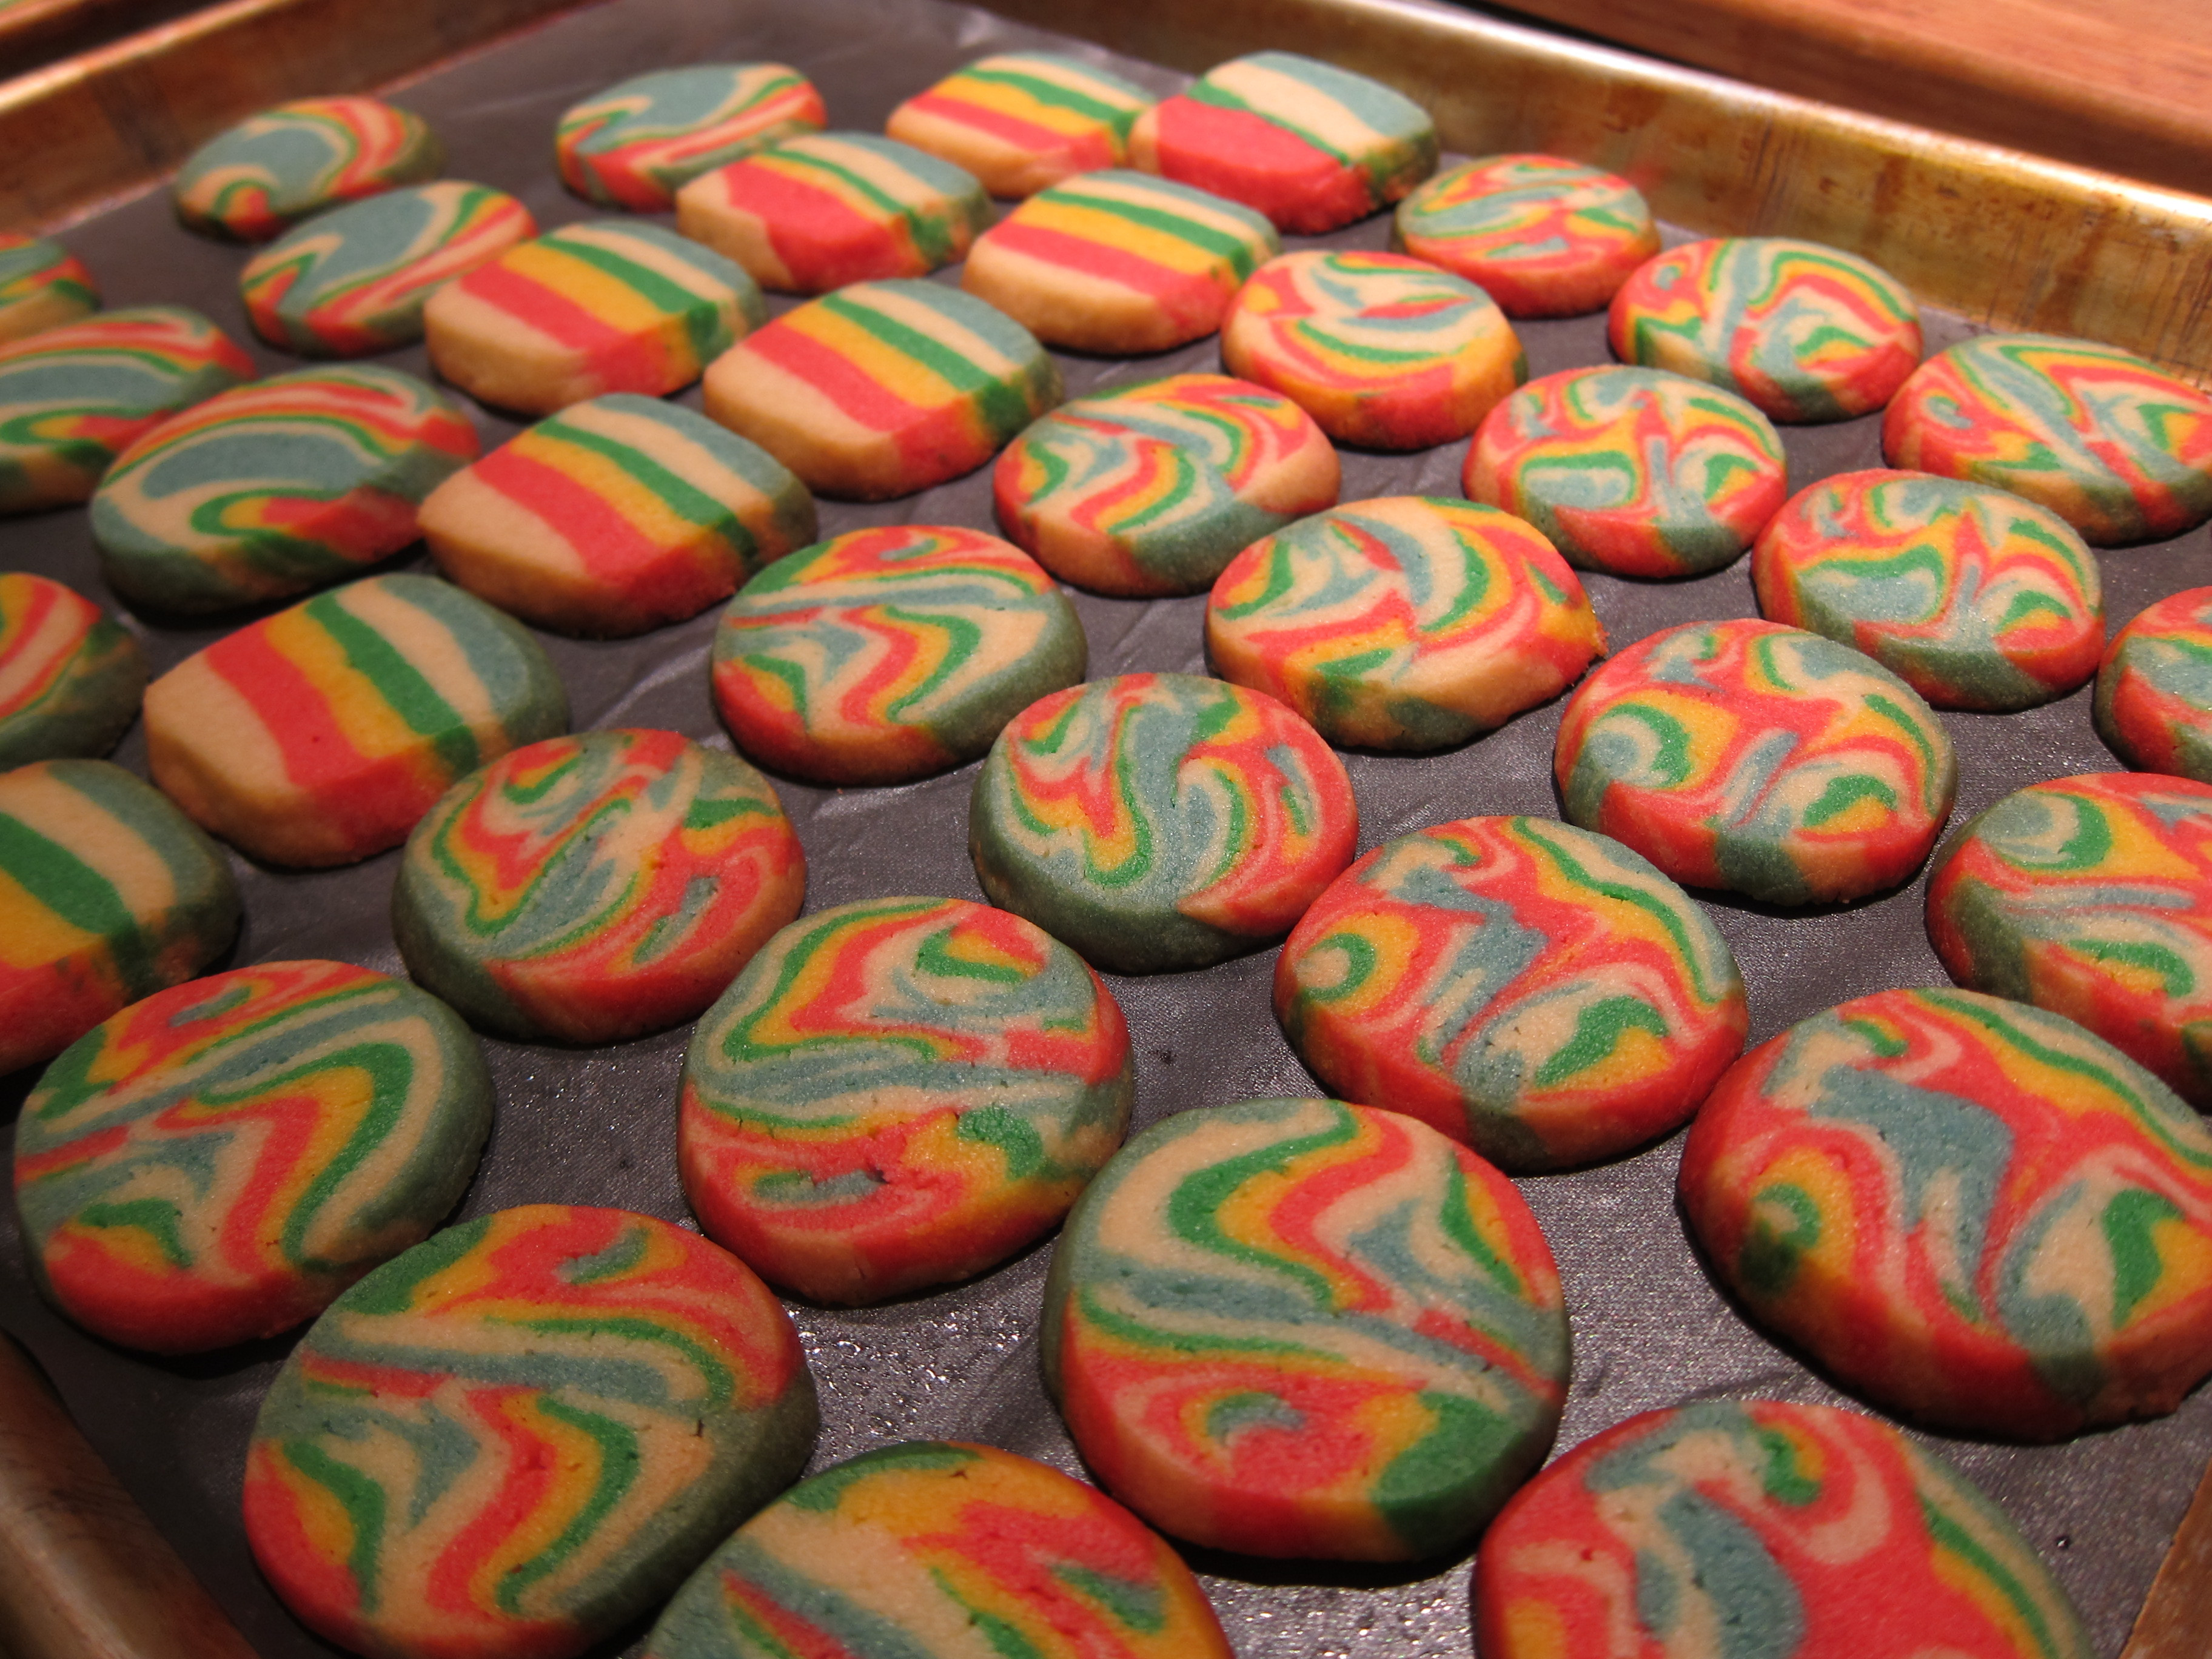 Colorful Christmas Cookies
 Blog Archive How to Make Colorful Holiday Cookies